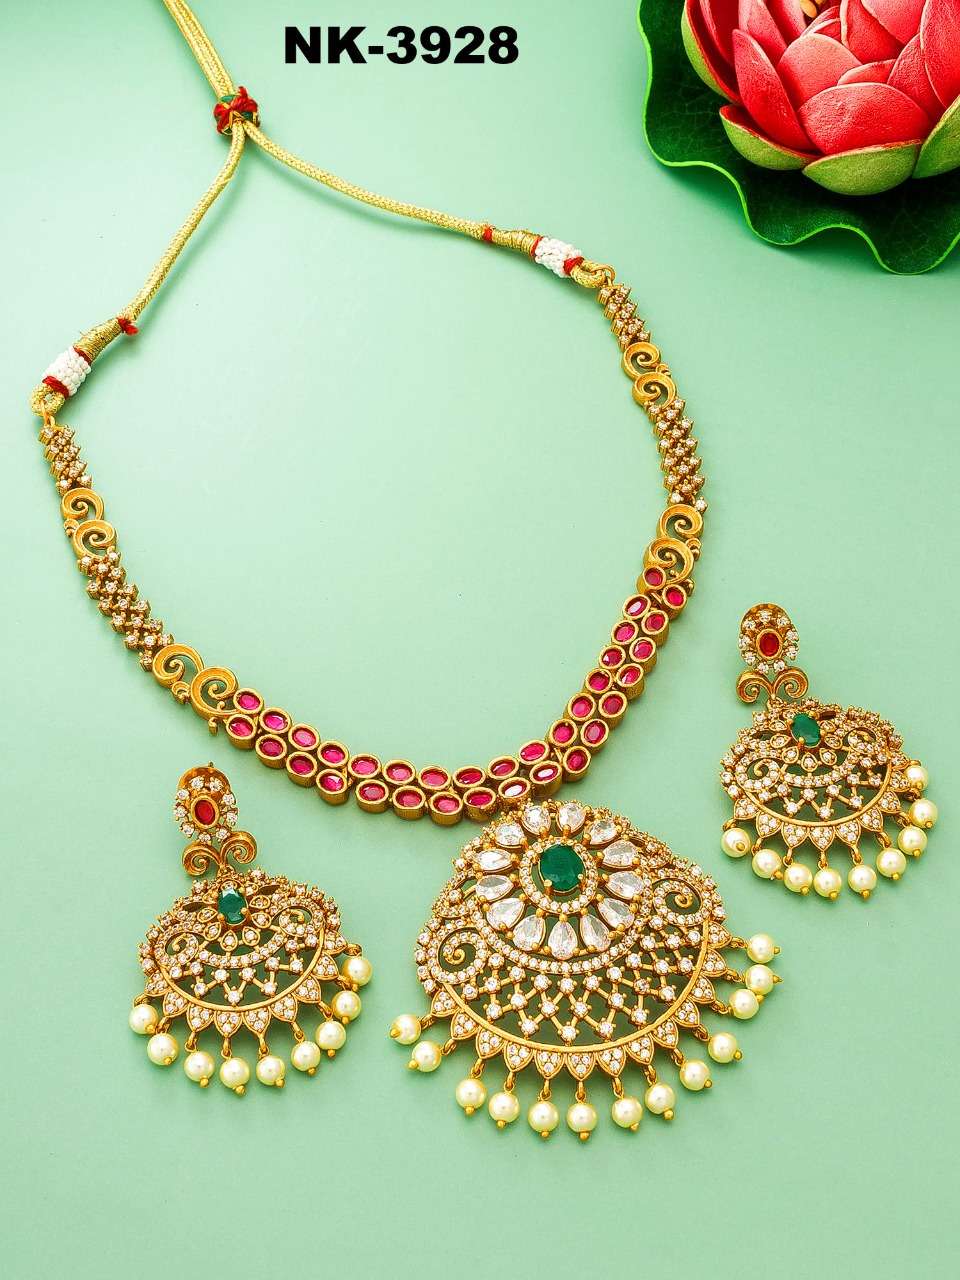 NK-3927 SERIES BY FASHID WHOLESALE 3927 TO 3931 SERIES TRADITIONAL IMITATION JEWELLERY FOR INDIAN ATTIRE AT EXCLUSIVE RANGE.